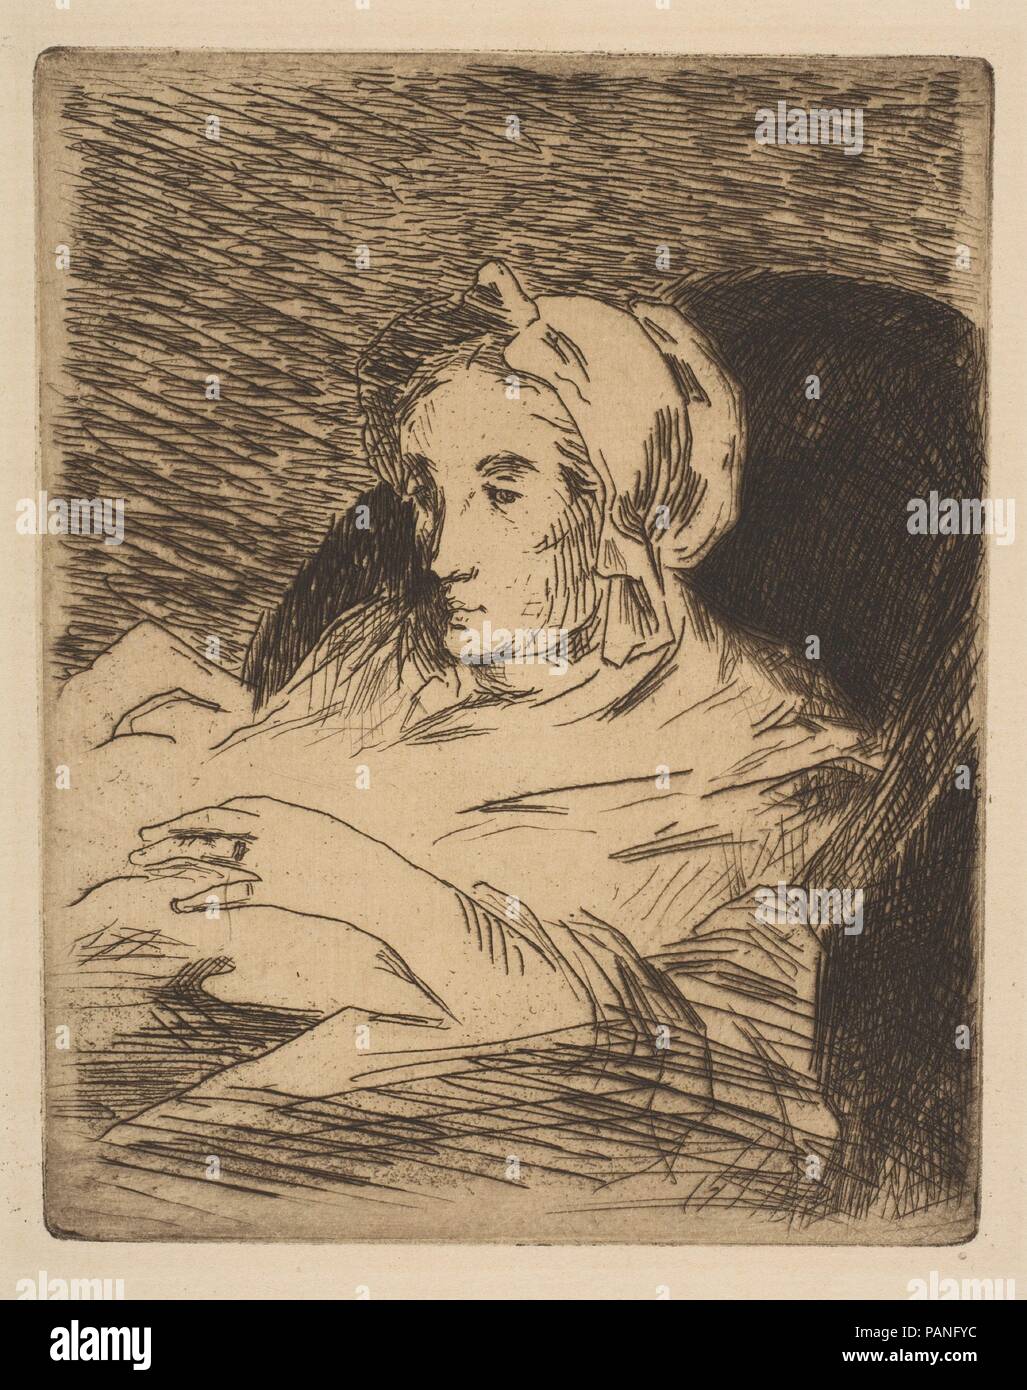 The Convalescent (Suzanne Manet). Artist: Édouard Manet (French, Paris 1832-1883 Paris). Dimensions: plate: 5 x 3 15/16in. (12.7 x 10cm)  sheet: 9 5/8 x 6 1/8in. (24.4 x 15.6cm). Sitter: Portrait of Suzanne Manet (French). Date: 1879-81 (?). Museum: Metropolitan Museum of Art, New York, USA. Stock Photo